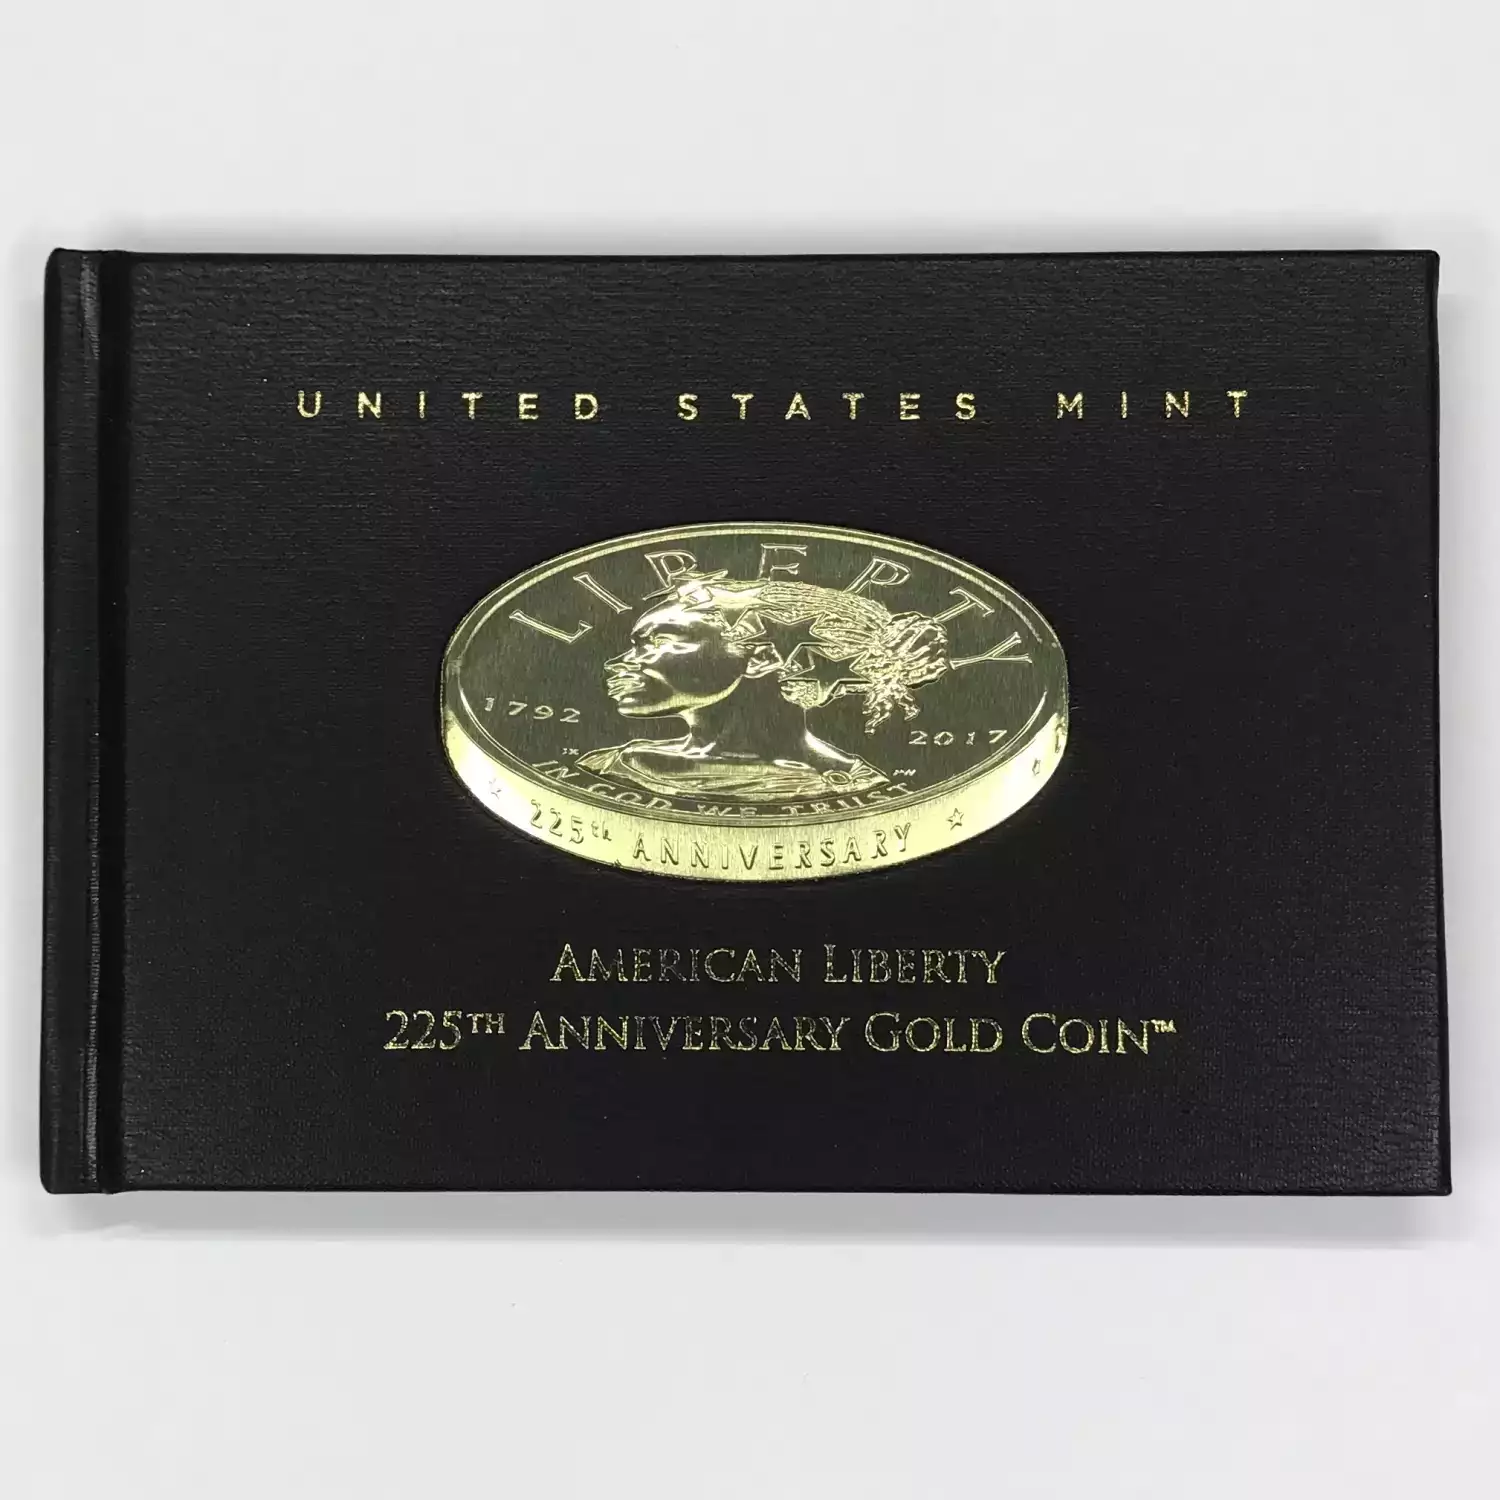 2017-W American Liberty 225th Anniversary 1 oz Proof $100 Gold Coin  US Mint OGP